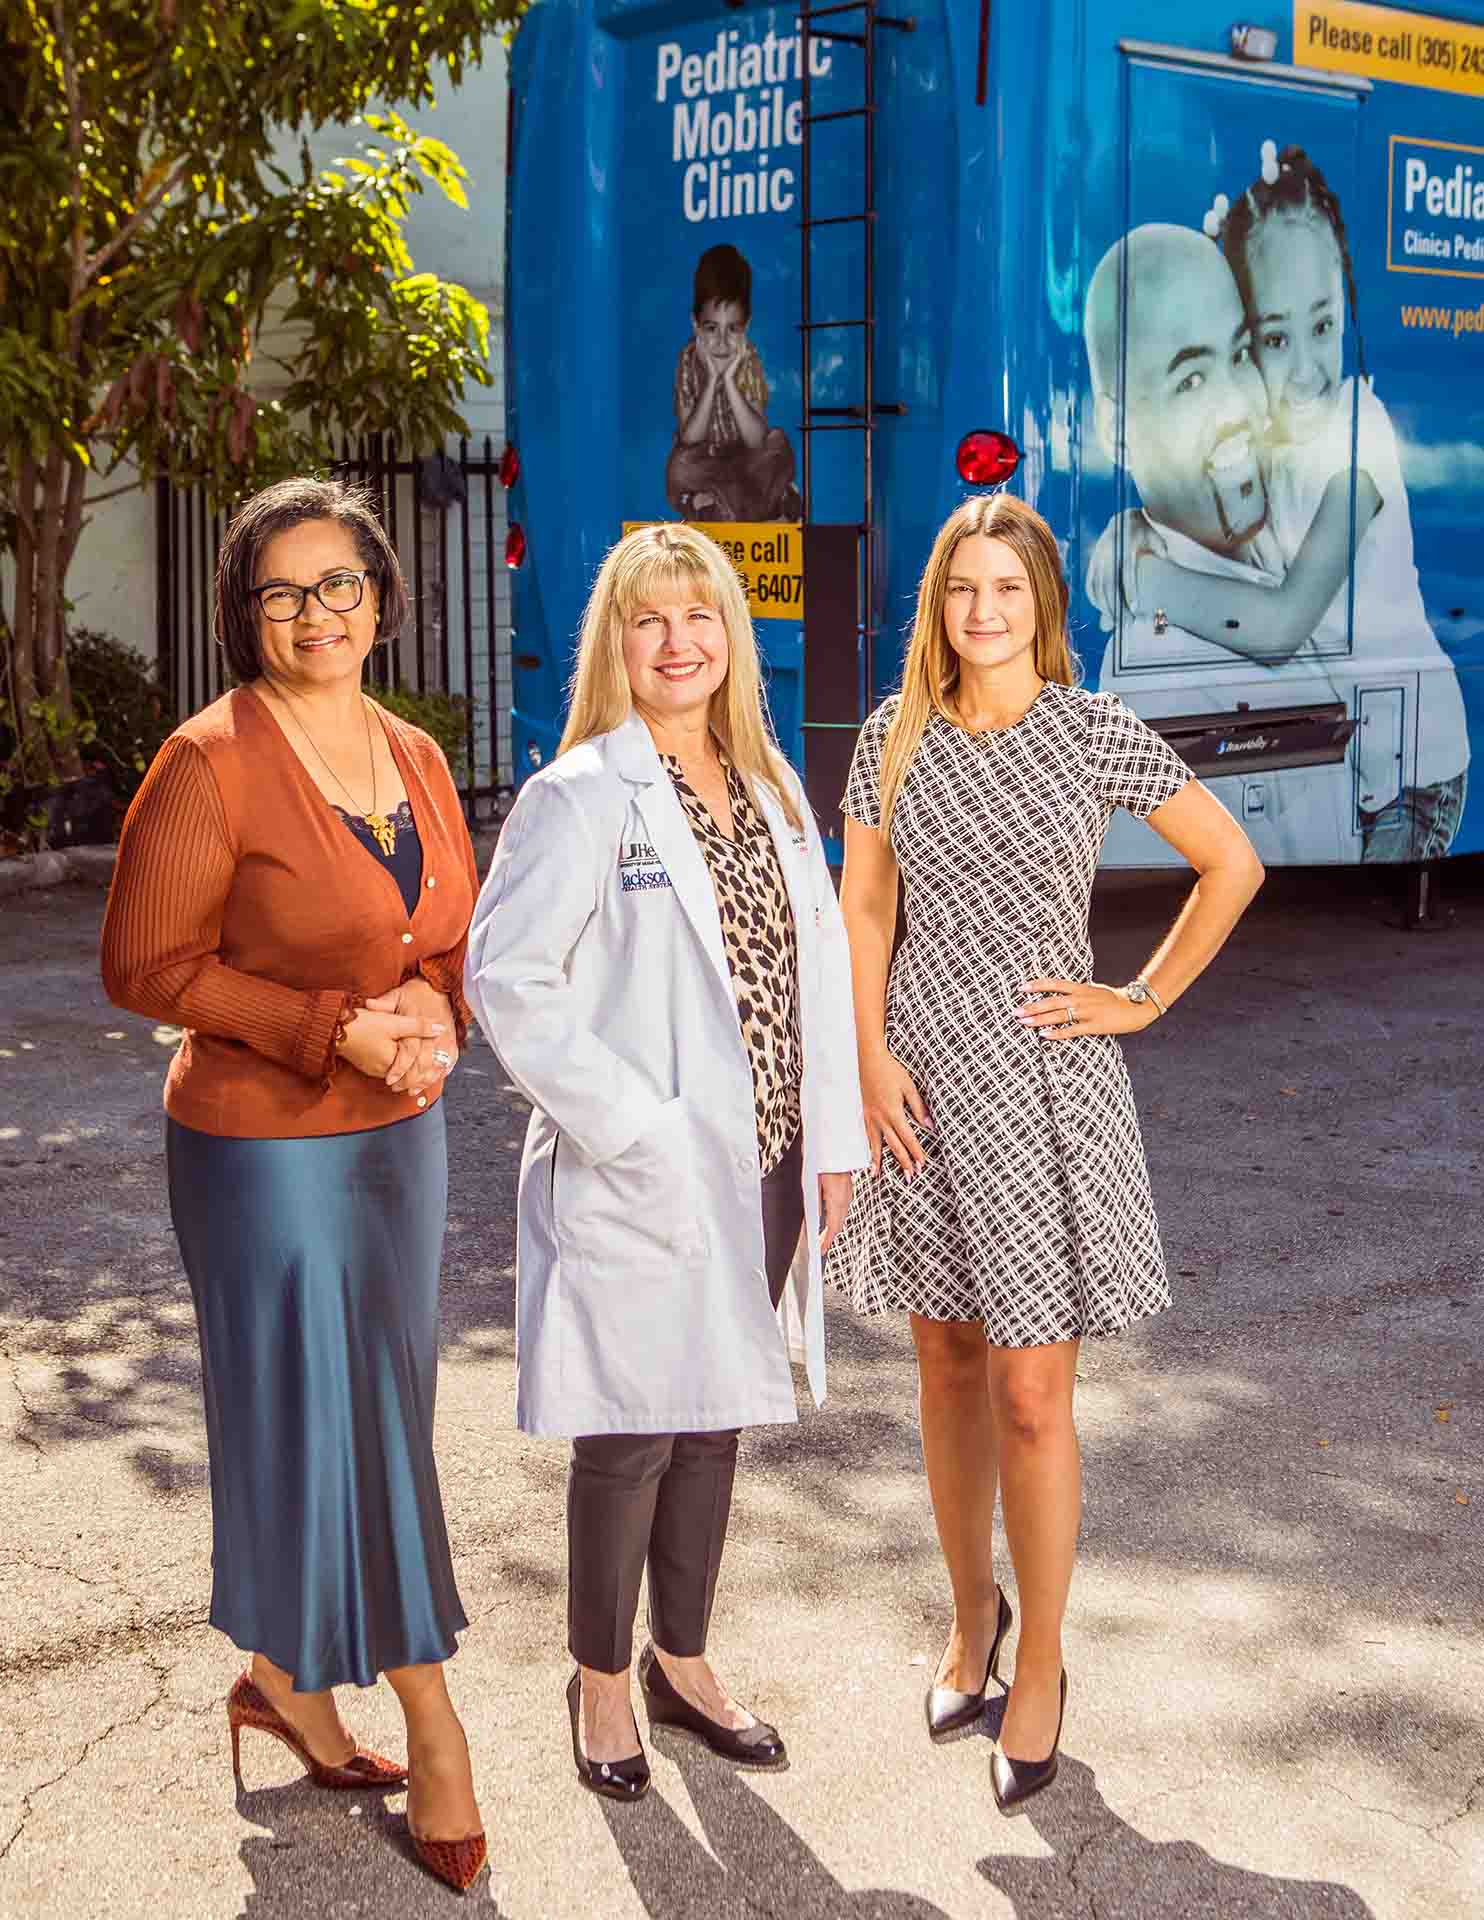 Women pose for photo in front of Pediatric Mobile Clinic